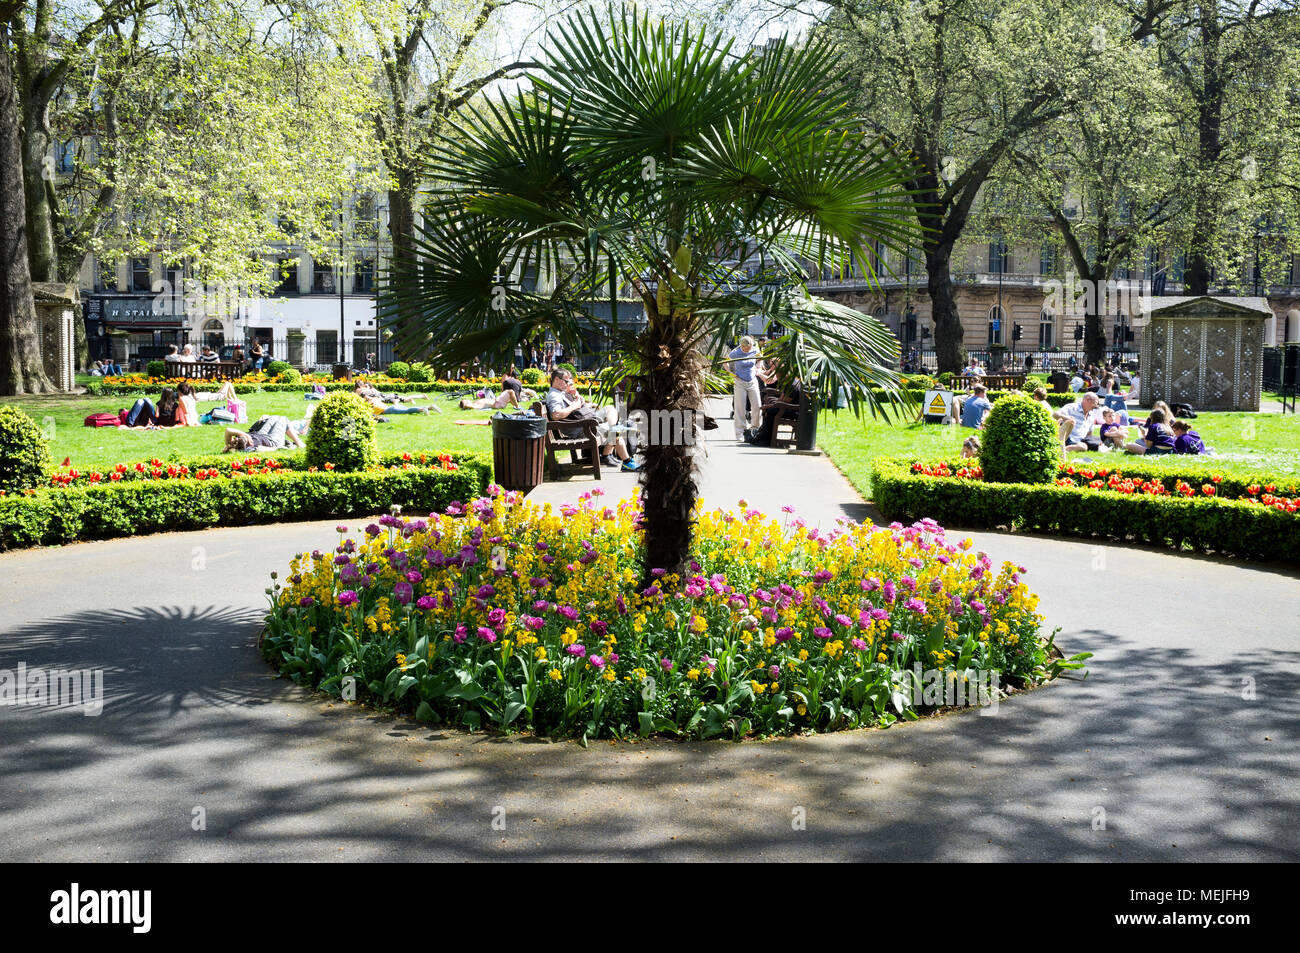 Tree and flower beds in Lower Grosvenor Gardens, near Victoria Station, London. Stock Photo